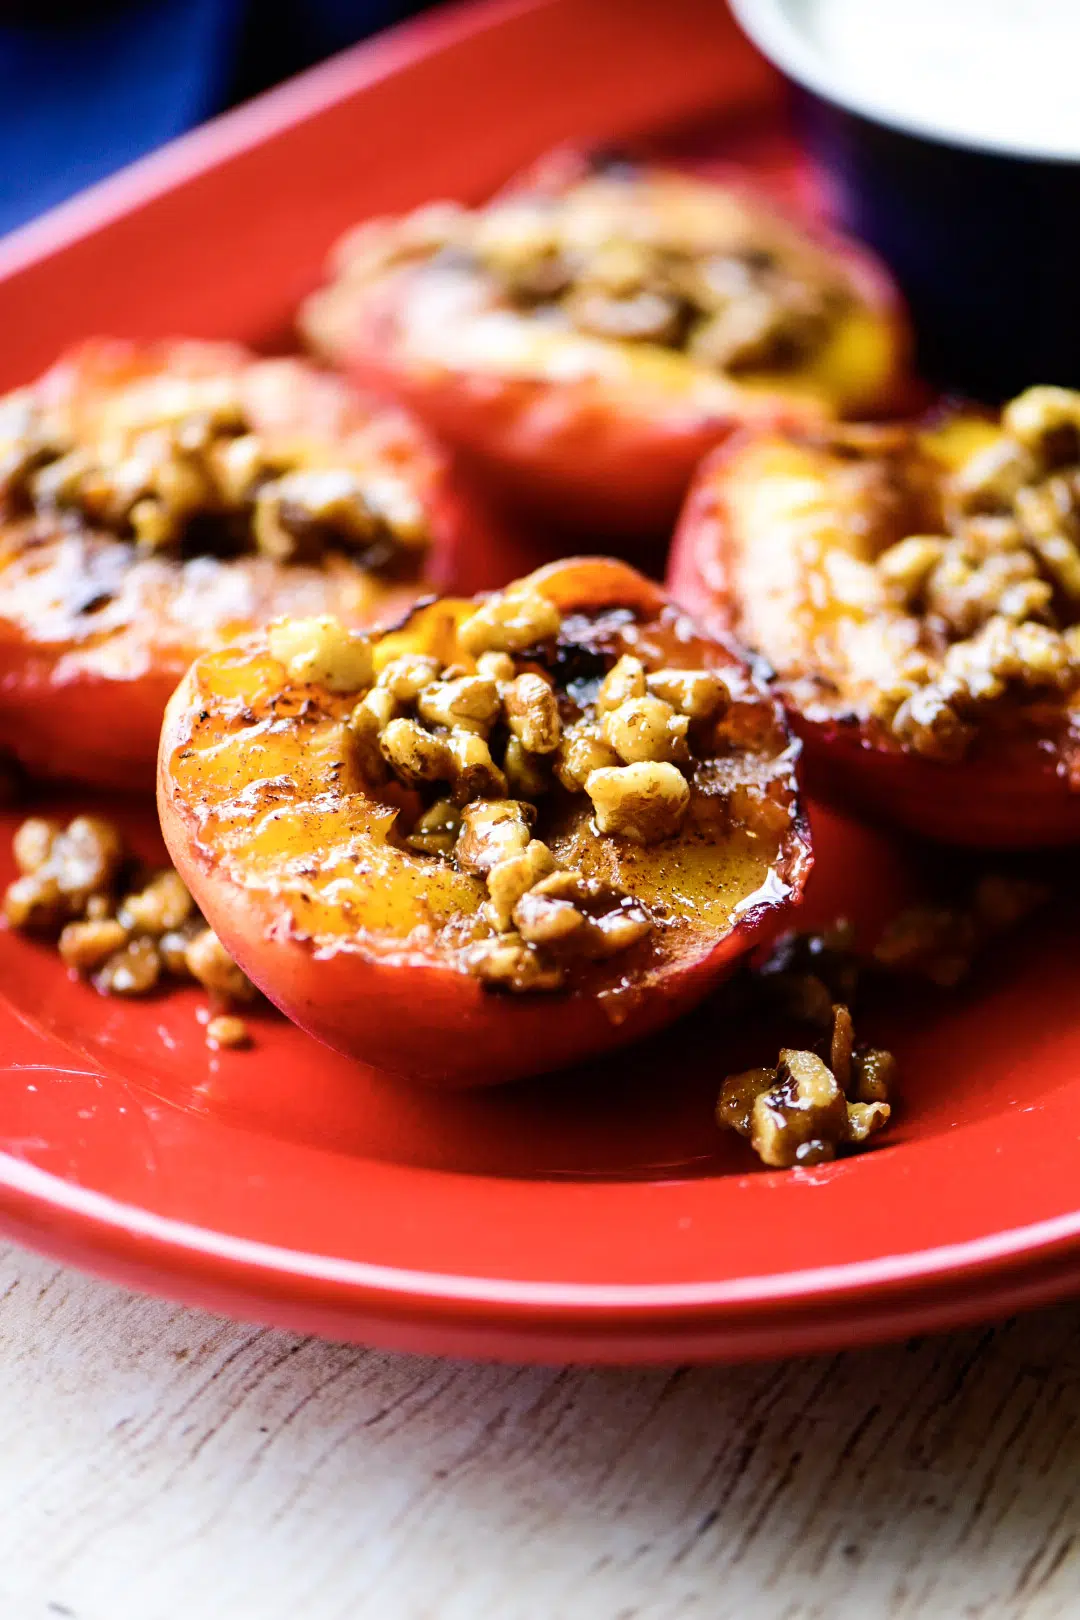 grilled peaches with candied walnuts